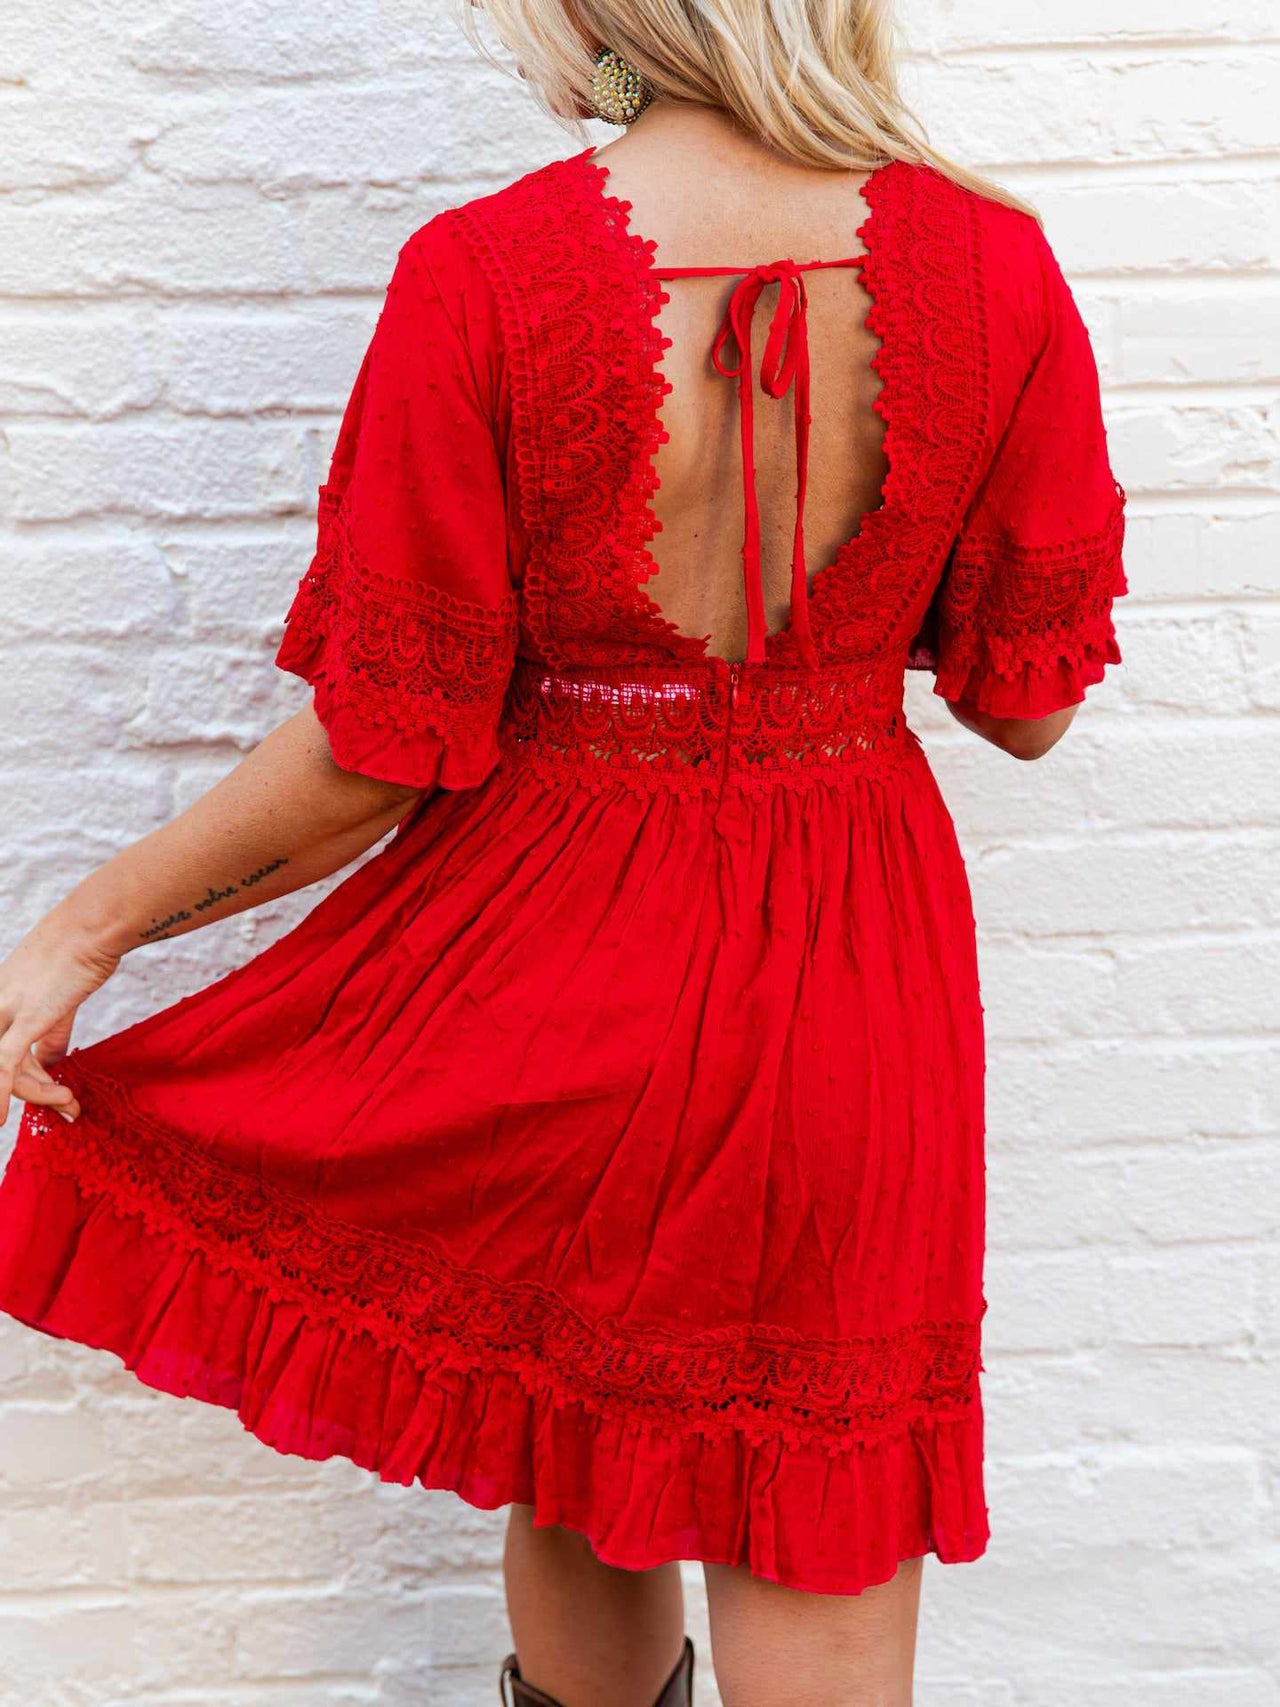 Picture Perfect Dress - Red-Dresses-Southern Fried Chics